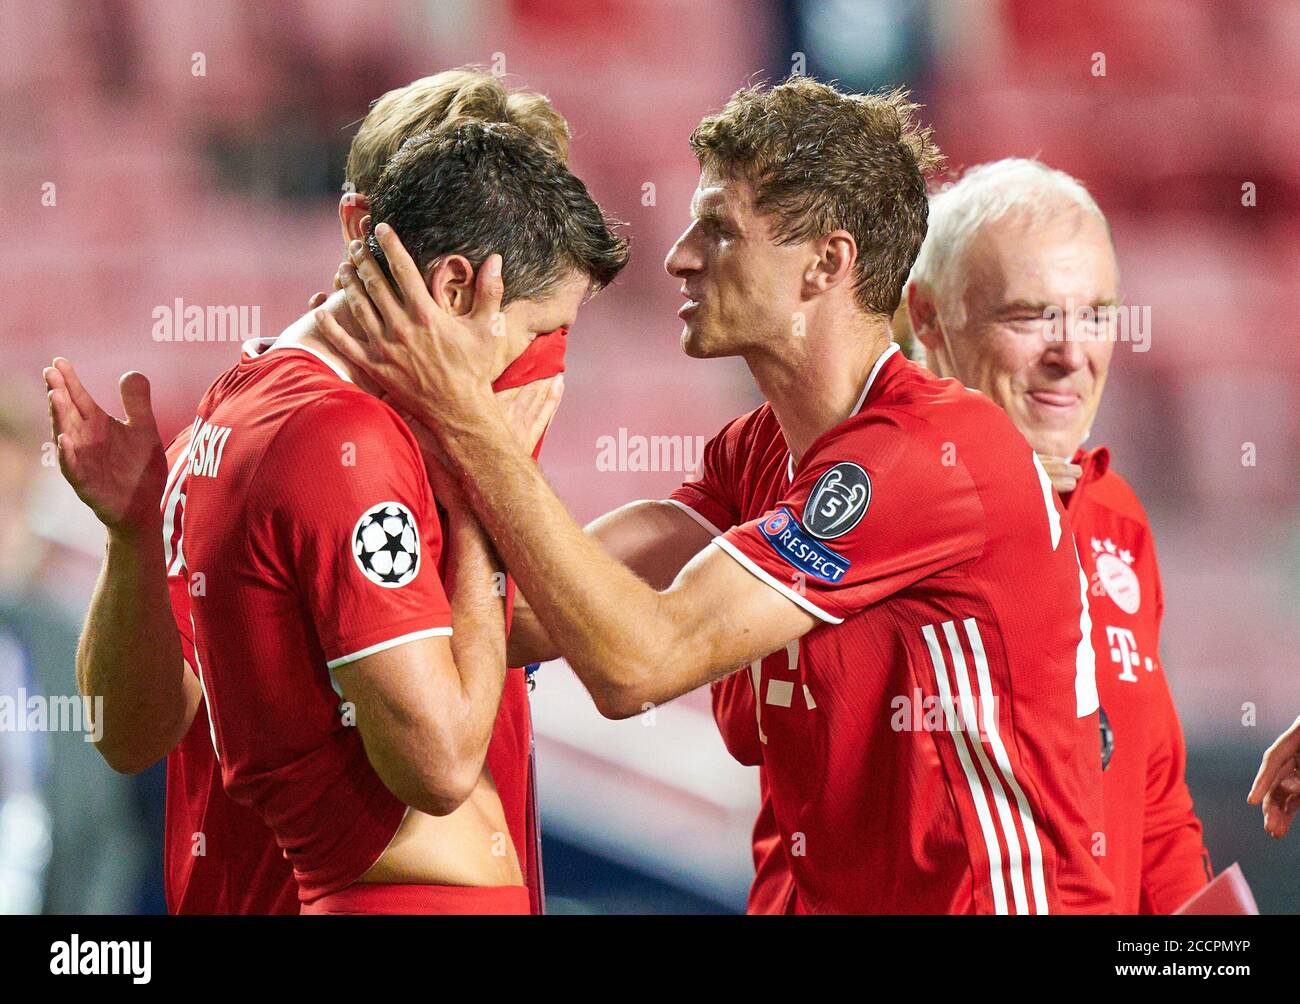 Lisbon, Lissabon, Portugal, 23rd August 2020.  FCB Co-Trainer Hermann GERLAND,  Thomas MUELLER, MÜLLER, FCB 25 Robert LEWANDOWSKI, FCB 9 with tears, weint vor Freude team FCB win the trophy in the final match UEFA Champions League, final tournament FC BAYERN MUENCHEN - PARIS ST. GERMAIN (PSG) 1-0 in season 2019/2020, FCB,  © Peter Schatz / Alamy Live News / Pool   - UEFA REGULATIONS PROHIBIT ANY USE OF PHOTOGRAPHS as IMAGE SEQUENCES and/or QUASI-VIDEO -  National and international News-Agencies OUT Editorial Use ONLY Stock Photo